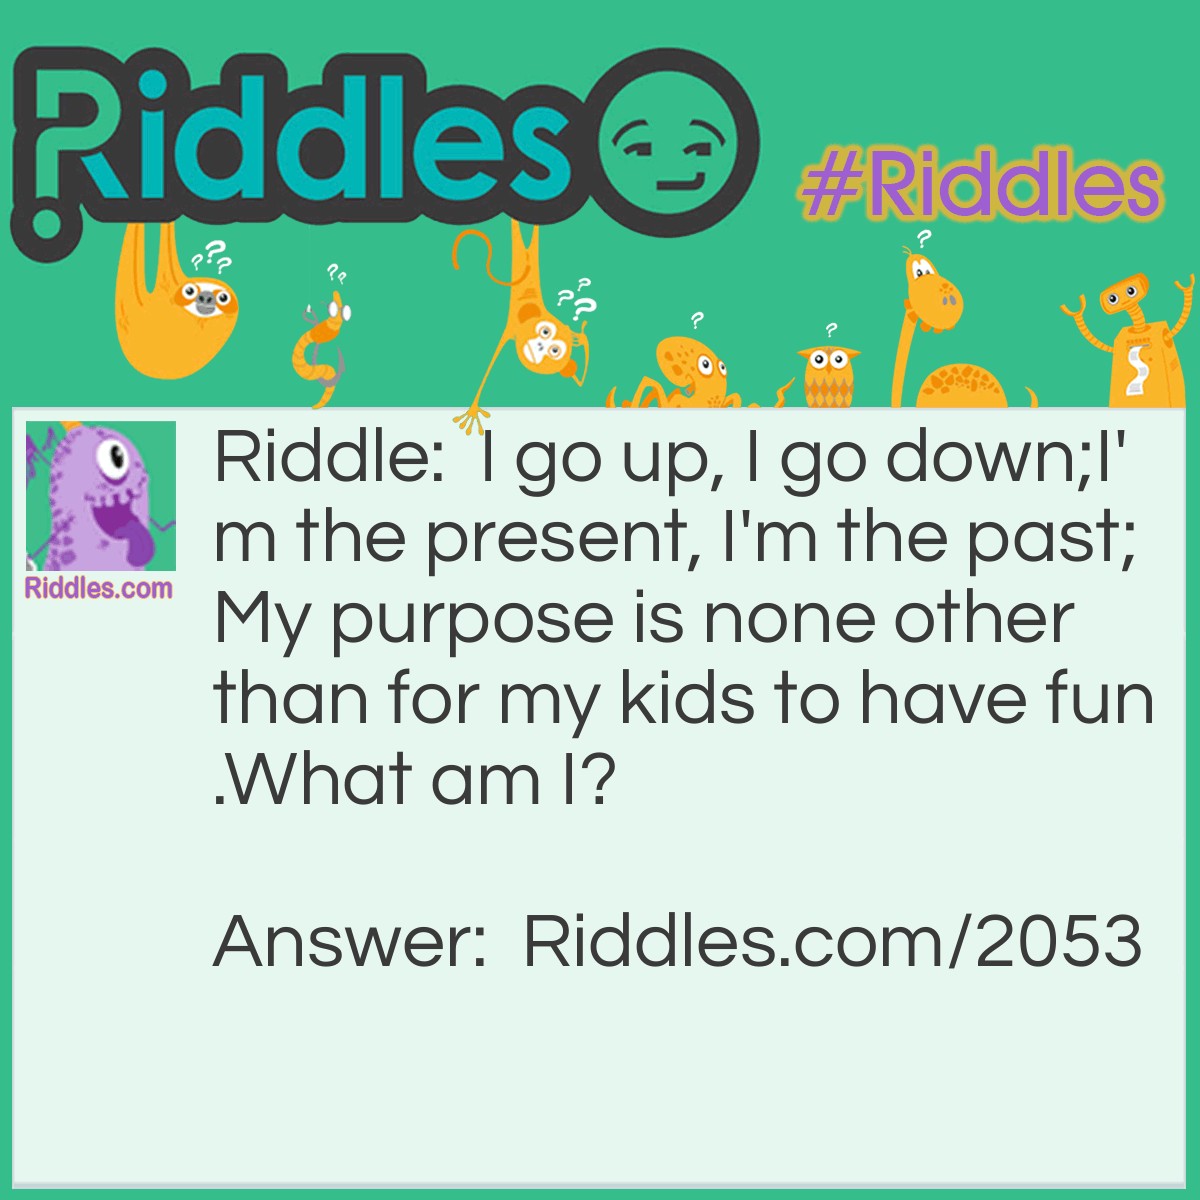 Riddle: I go up, I go down;
I'm the present, I'm the past;
My purpose is none other than for my kids to have fun.
What am I? Answer: A See-Saw.